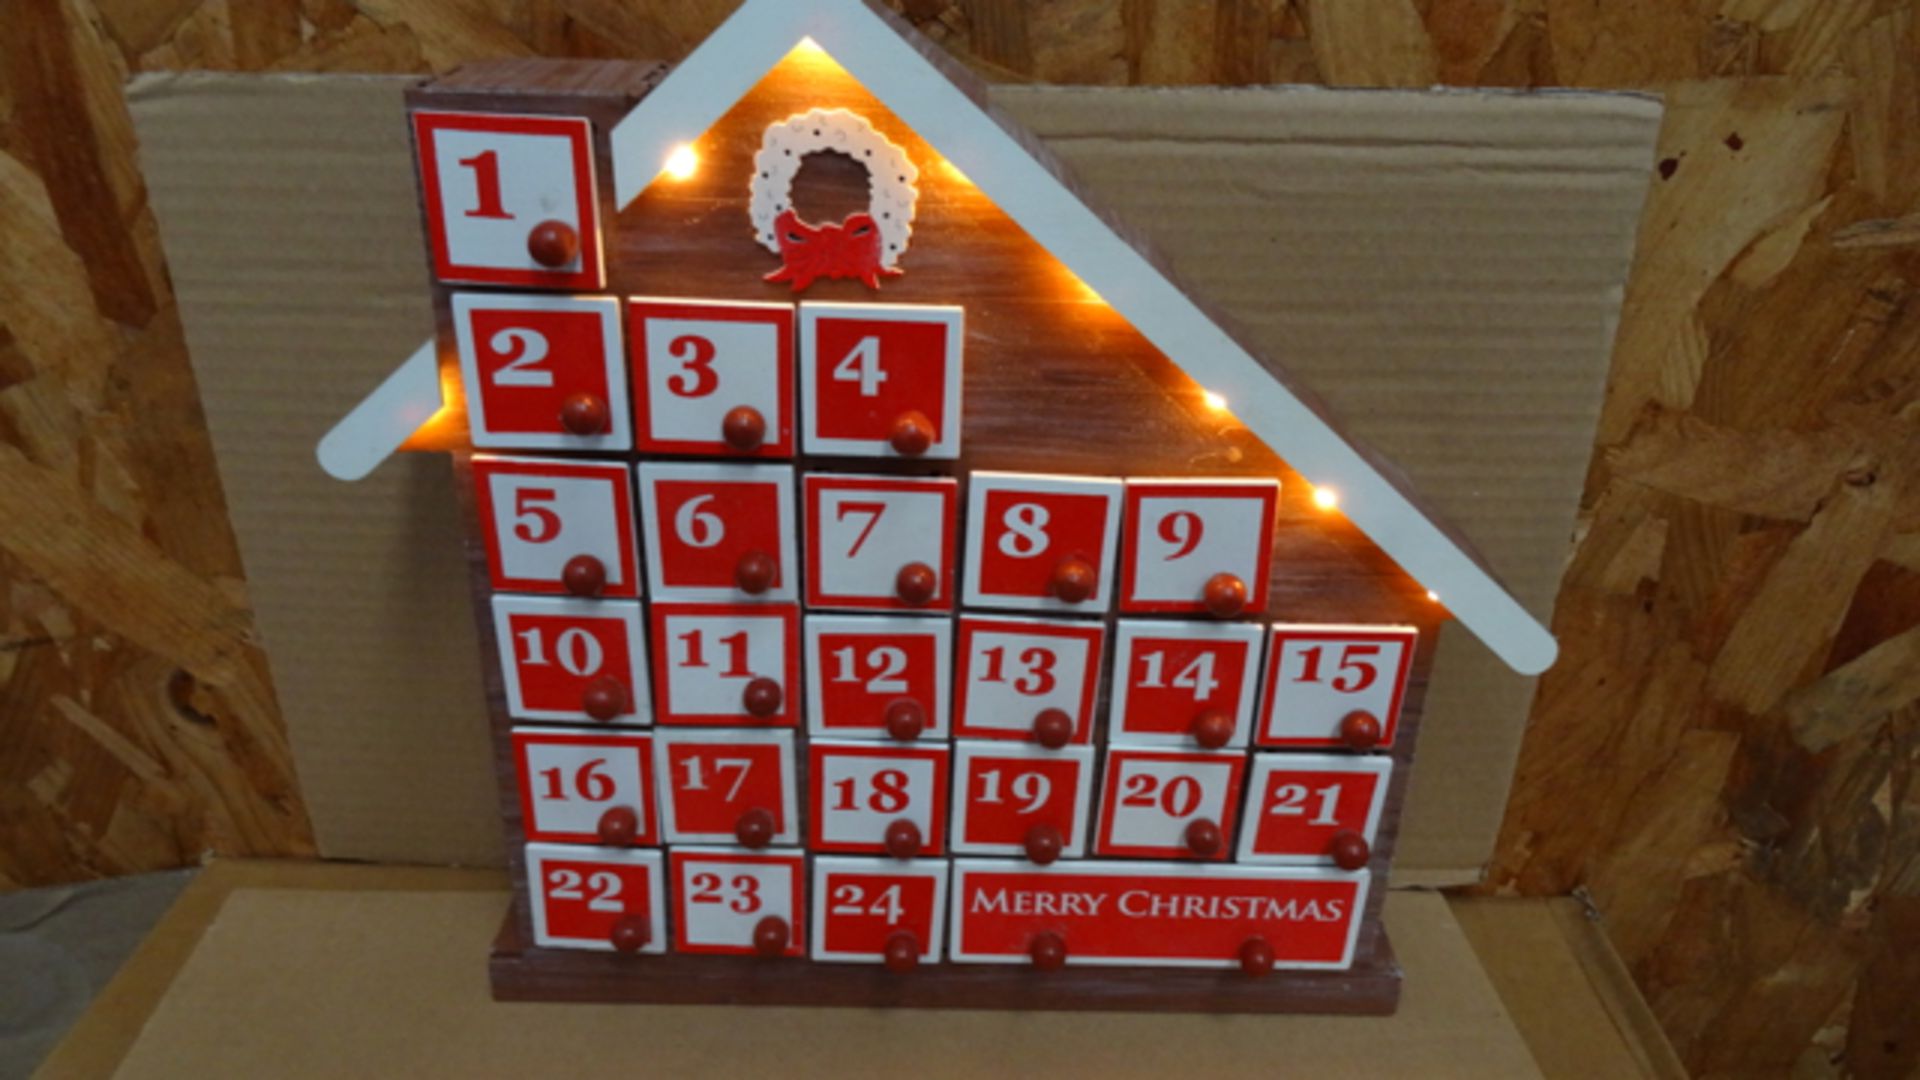 12 x Christmas Workshop Wooden Advent Calendar House with 8 LED Lights. RRP £40 Each!
The